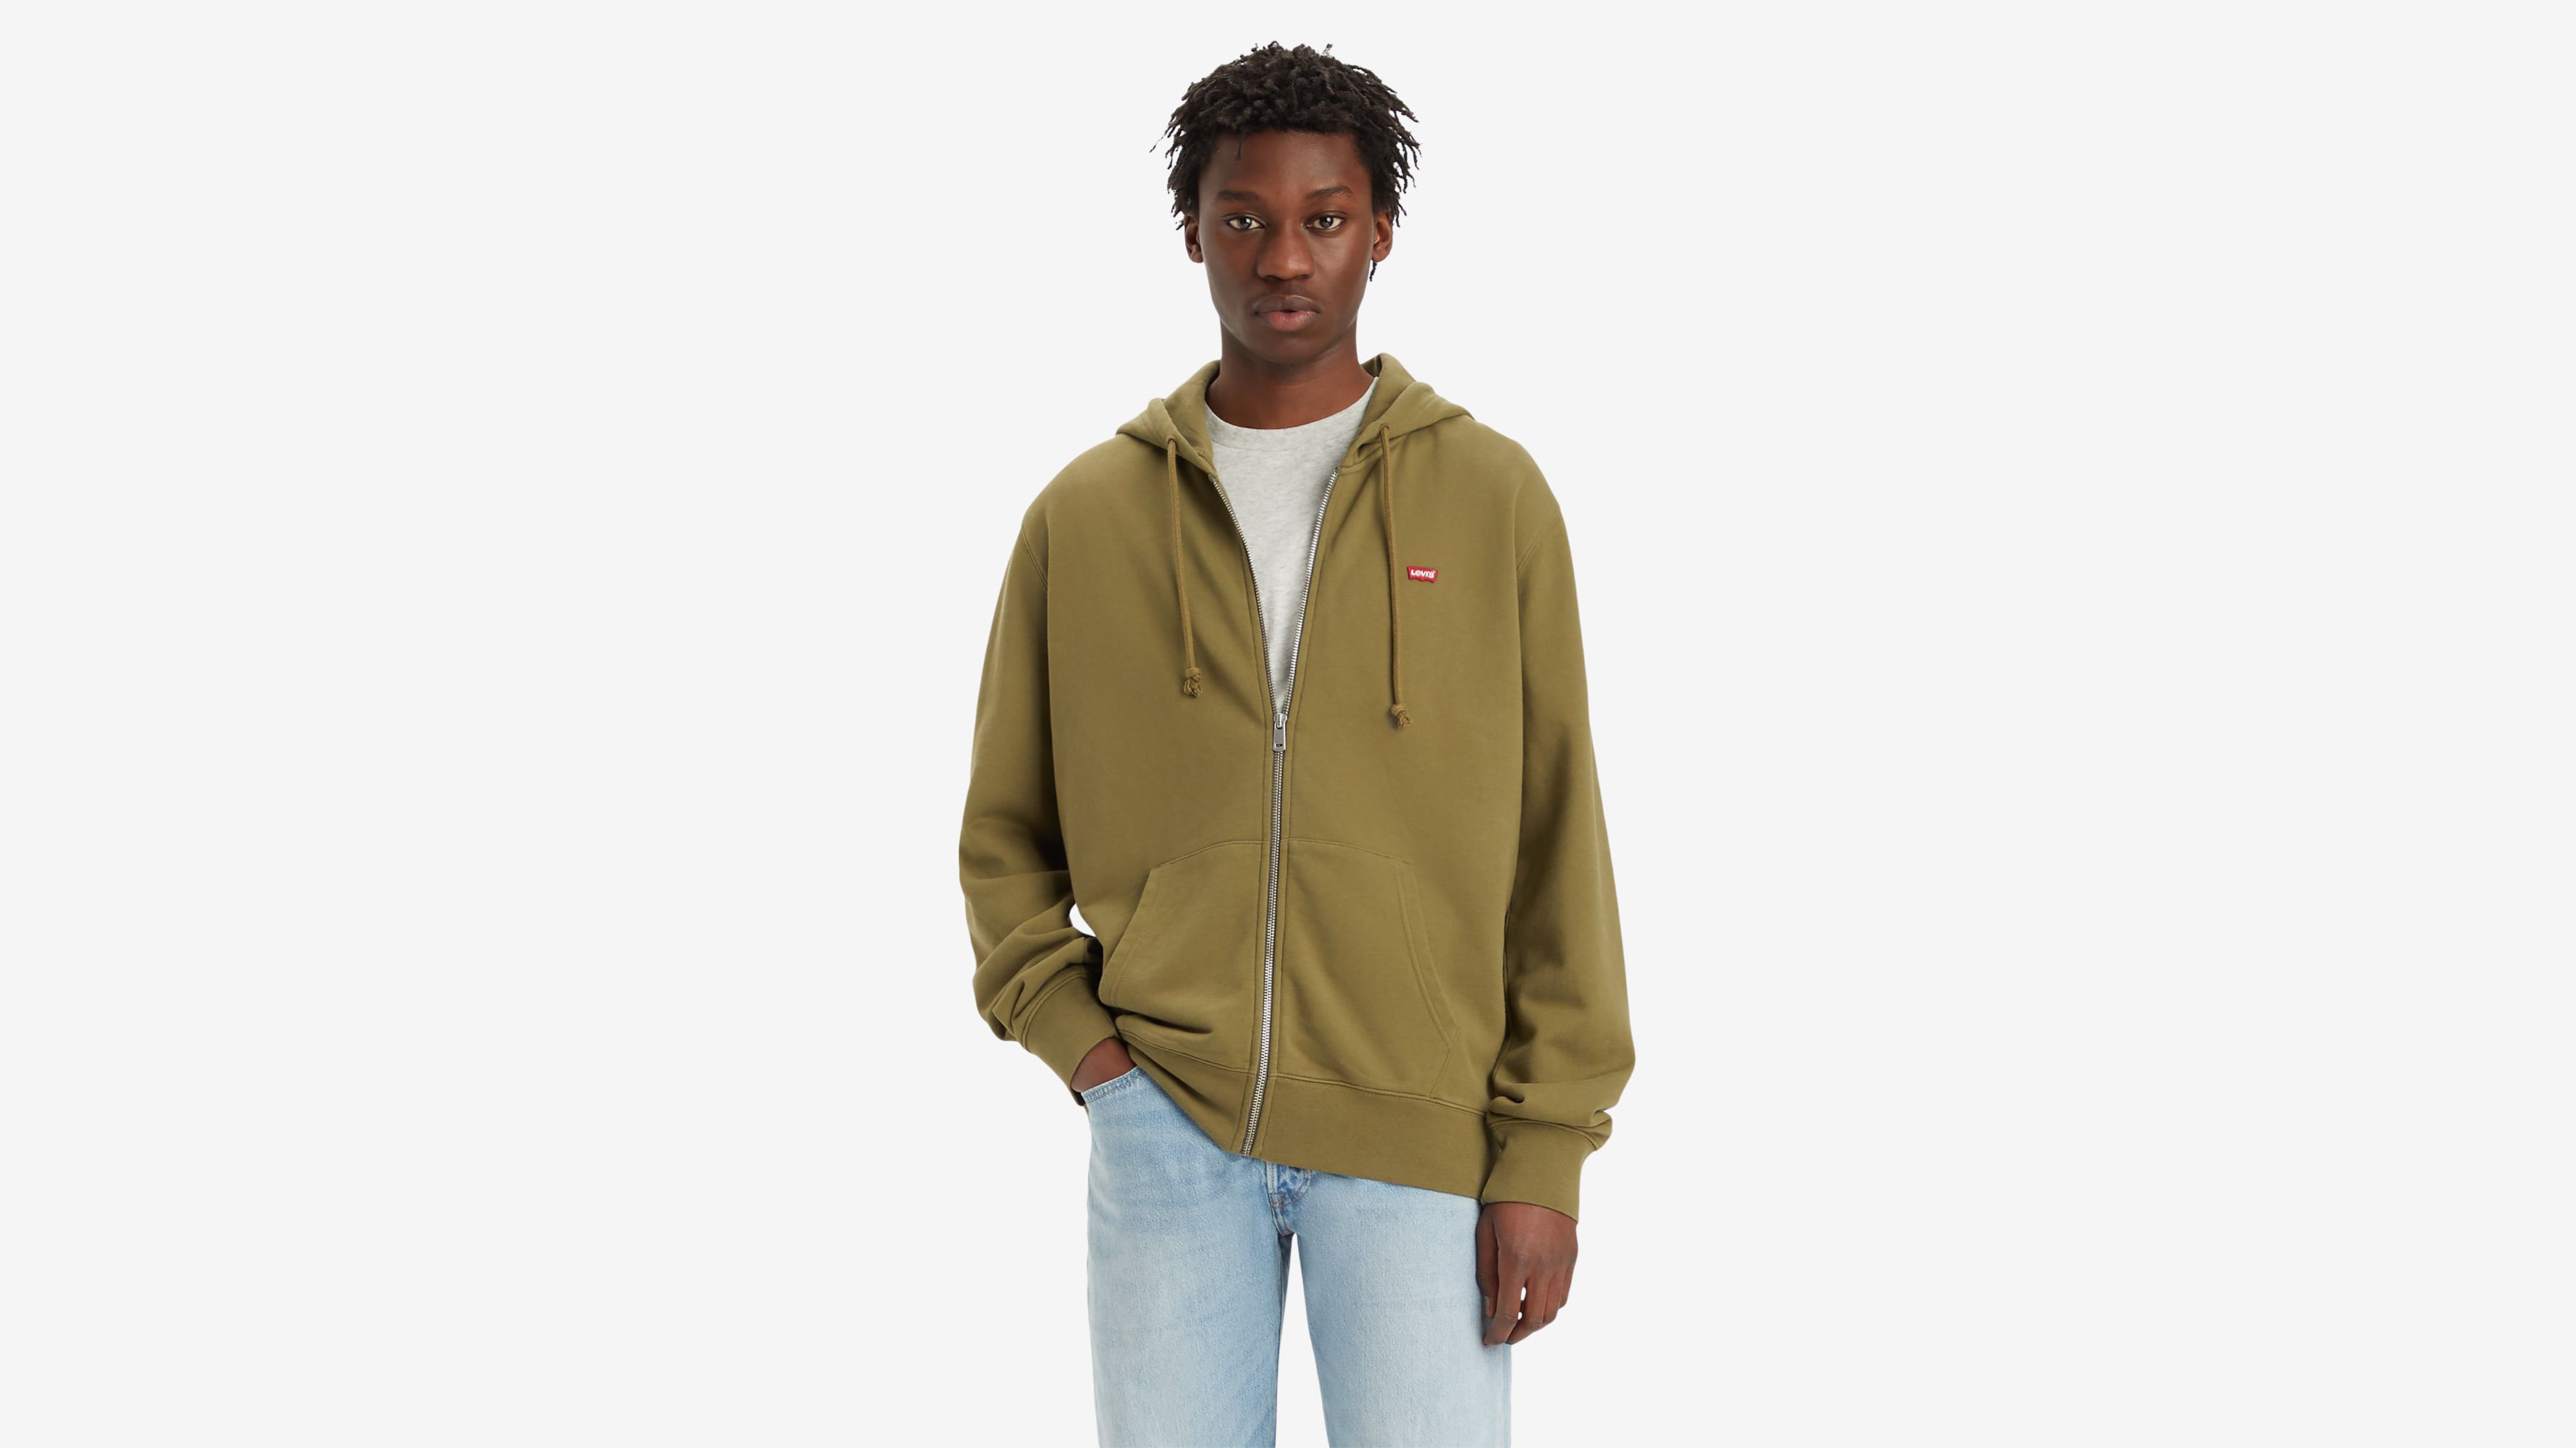 Laxlife Classic Embroidered Zip-Up Hoodie (Canada)